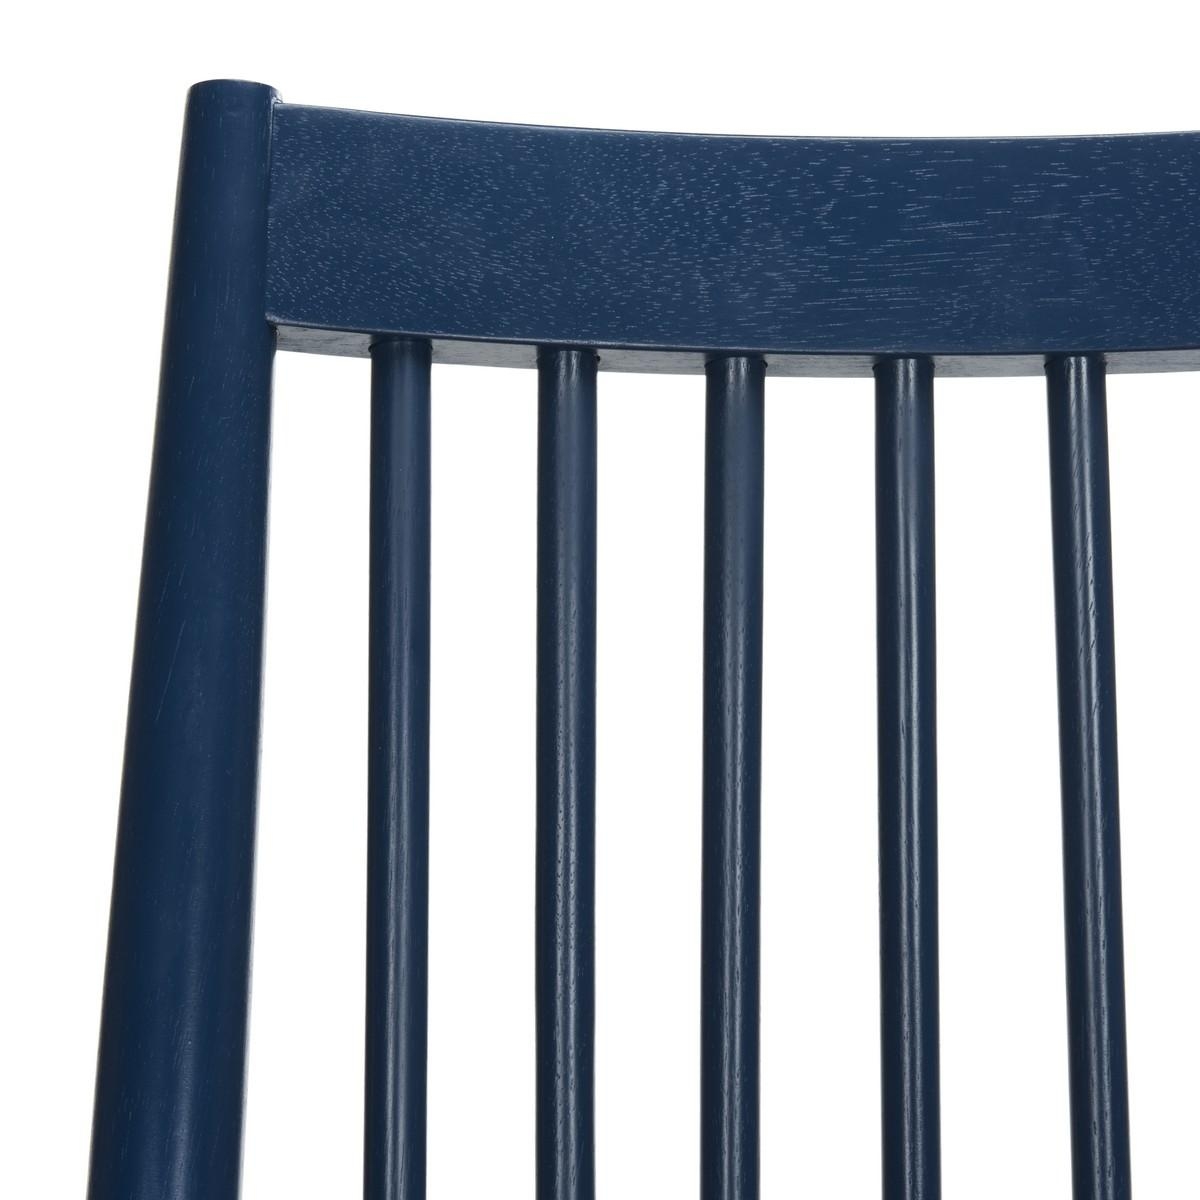 Wren 19"H Spindle Dining Chair - Navy - Arlo Home - Image 3